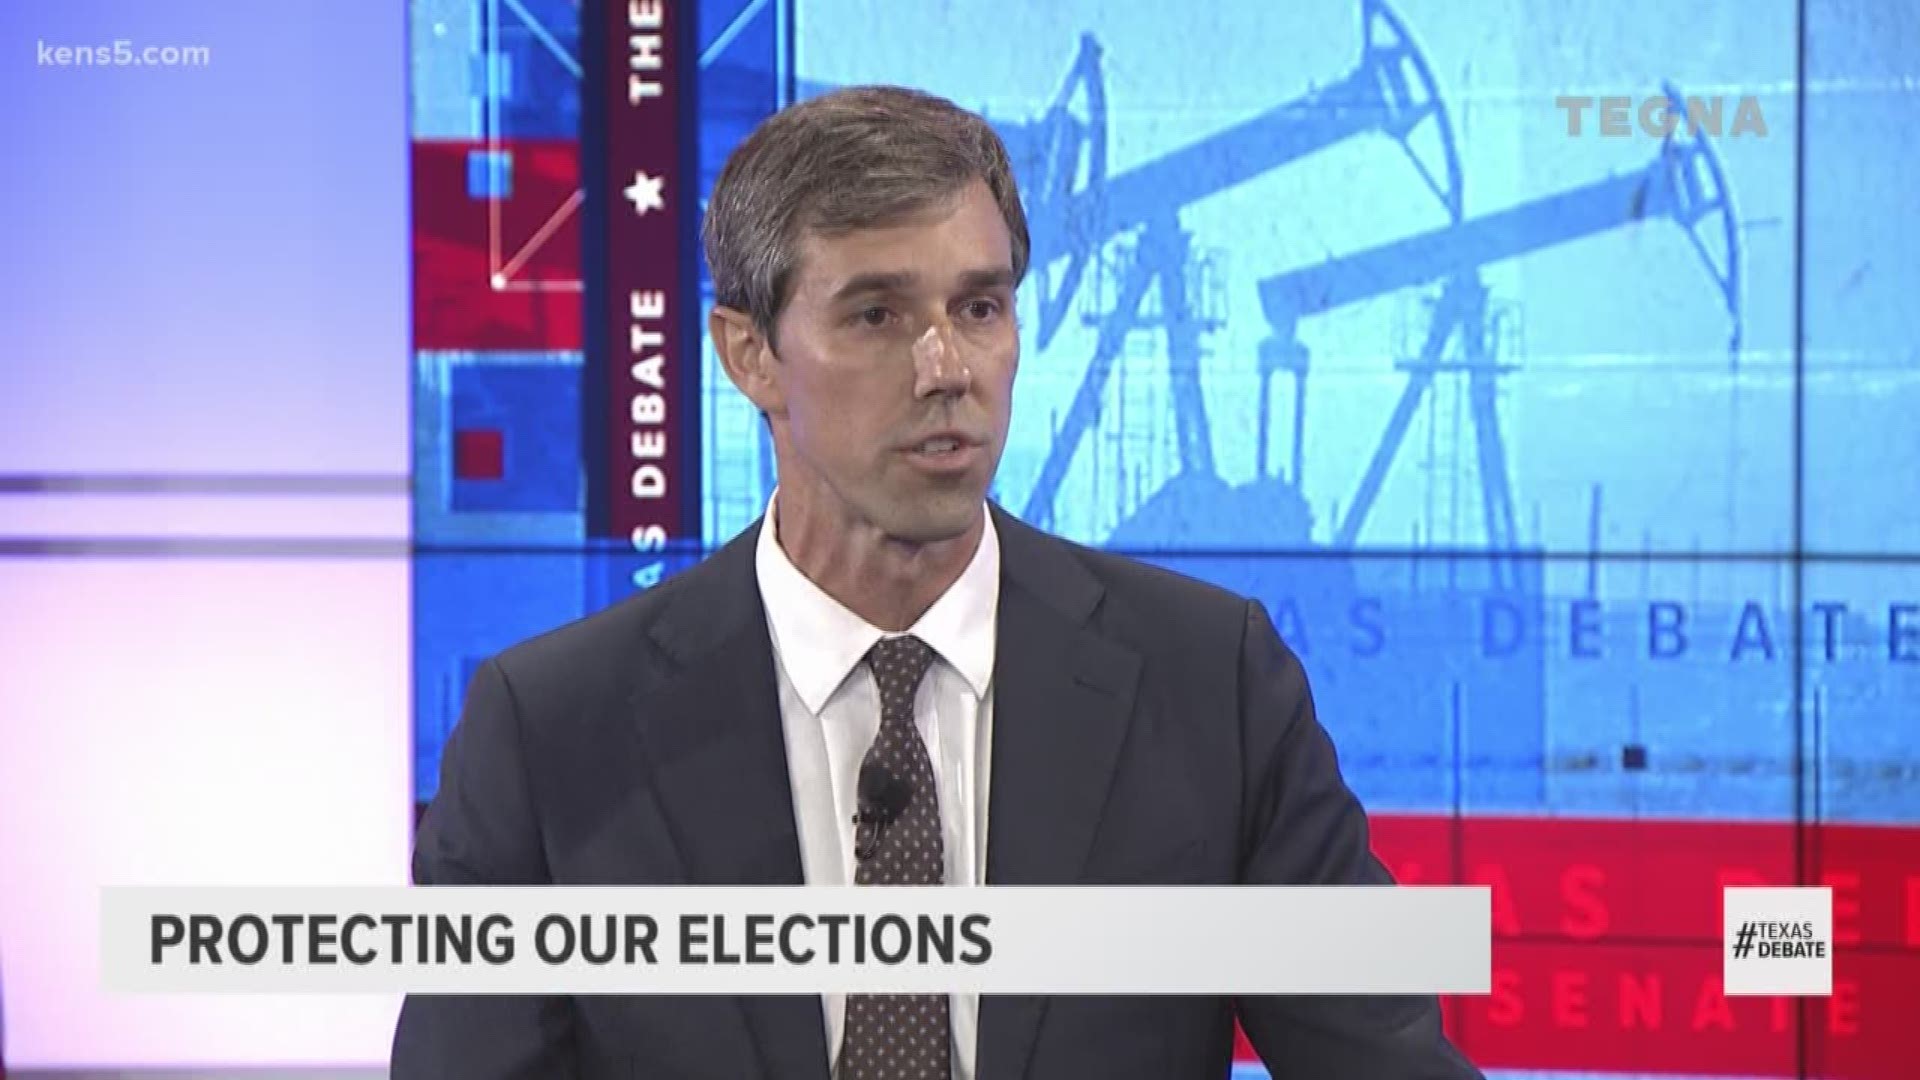 Candidate Beto O'Rourke says Sen. Ted Cruz won't stand up to President Trump when he defends countries trying to meddle in U.S. elections.